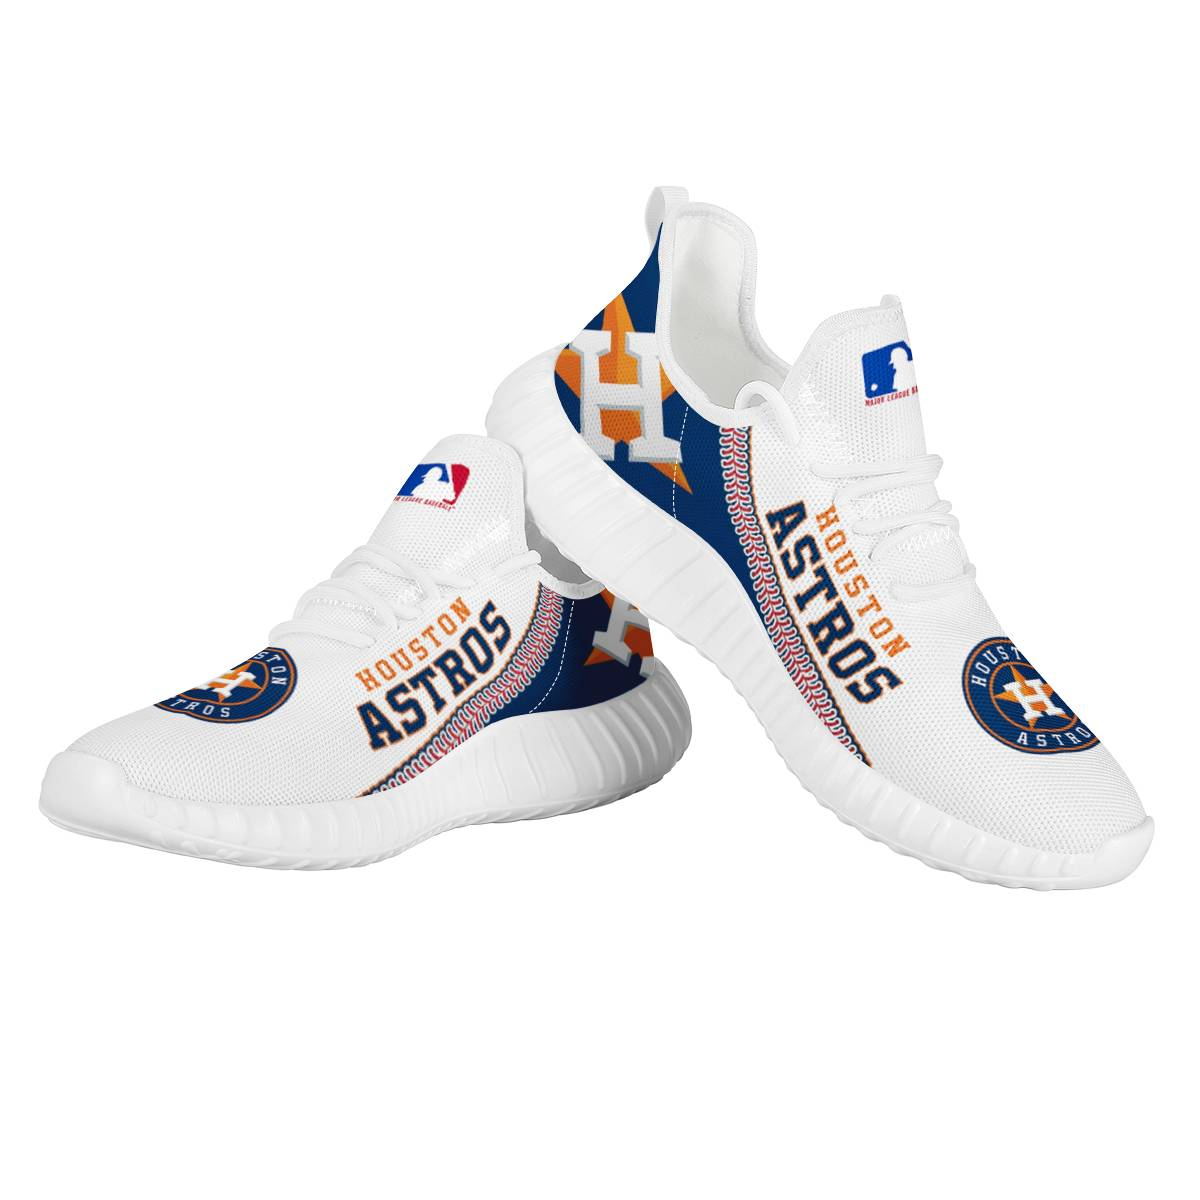 Women's MLB Houston Astros Mesh Knit Sneakers/Shoes 003